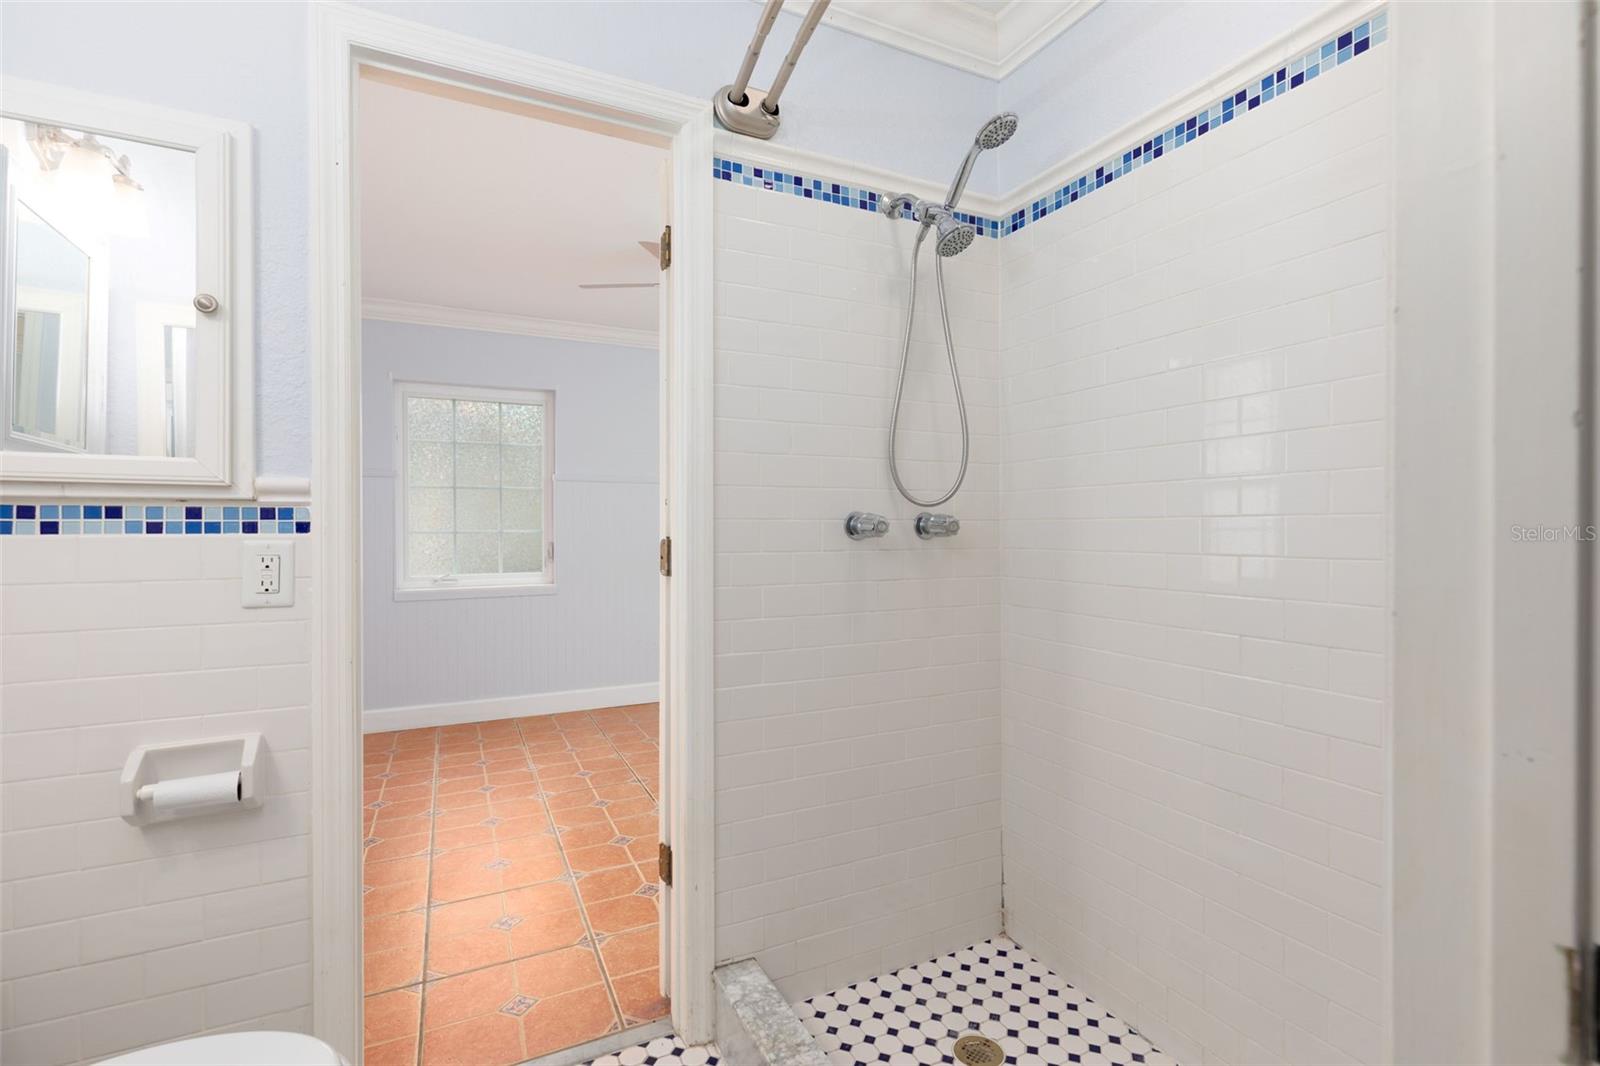 Shower in Accessory Dwelling Space